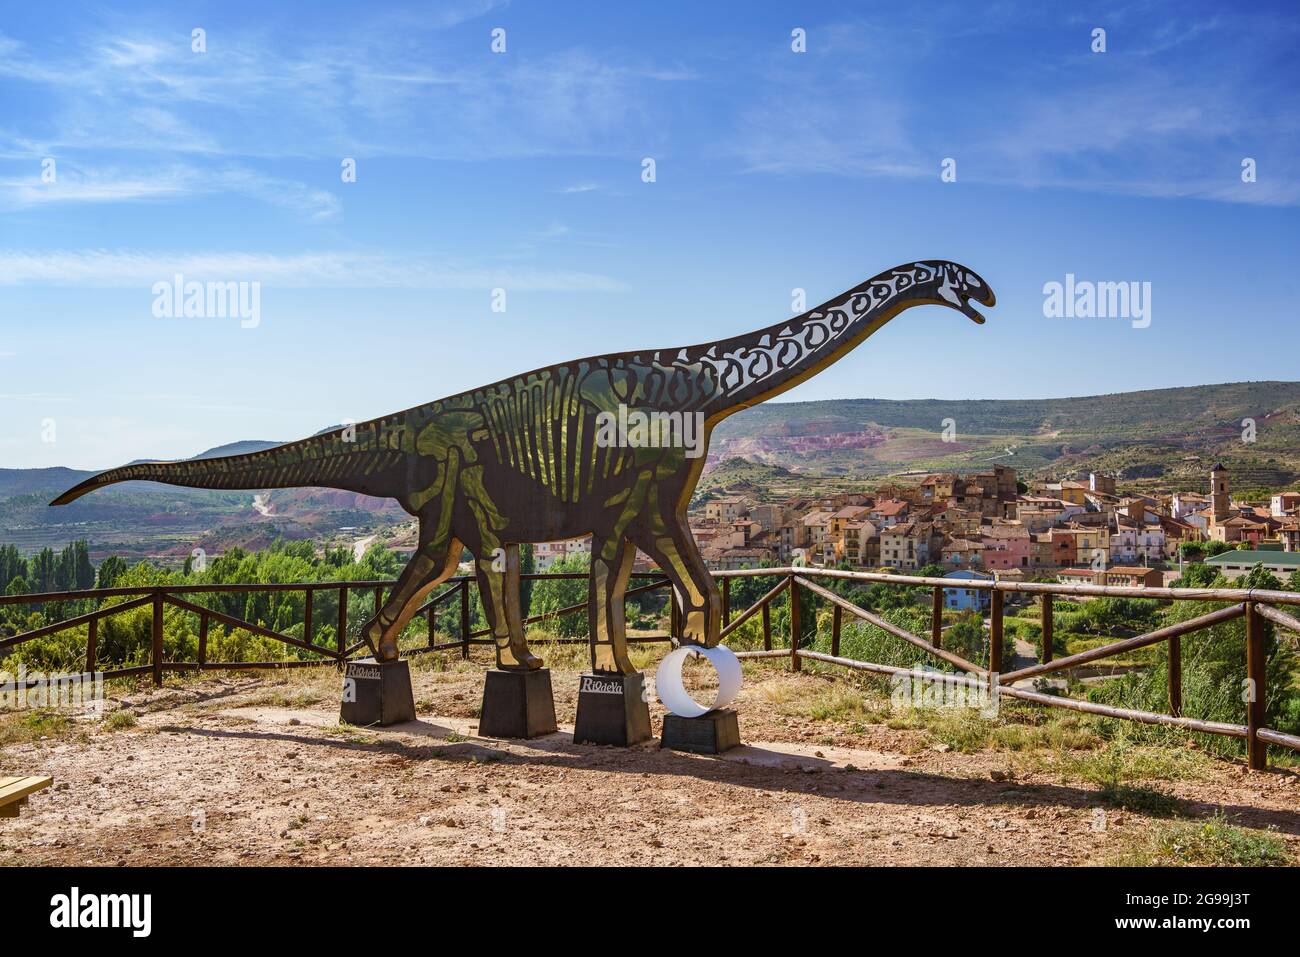 Teruel, Spain. July 24, 2021. Silhouette of a dinosaur in Riodeva, a small town in the province of Teruel, Aragon, Spain. Stock Photo